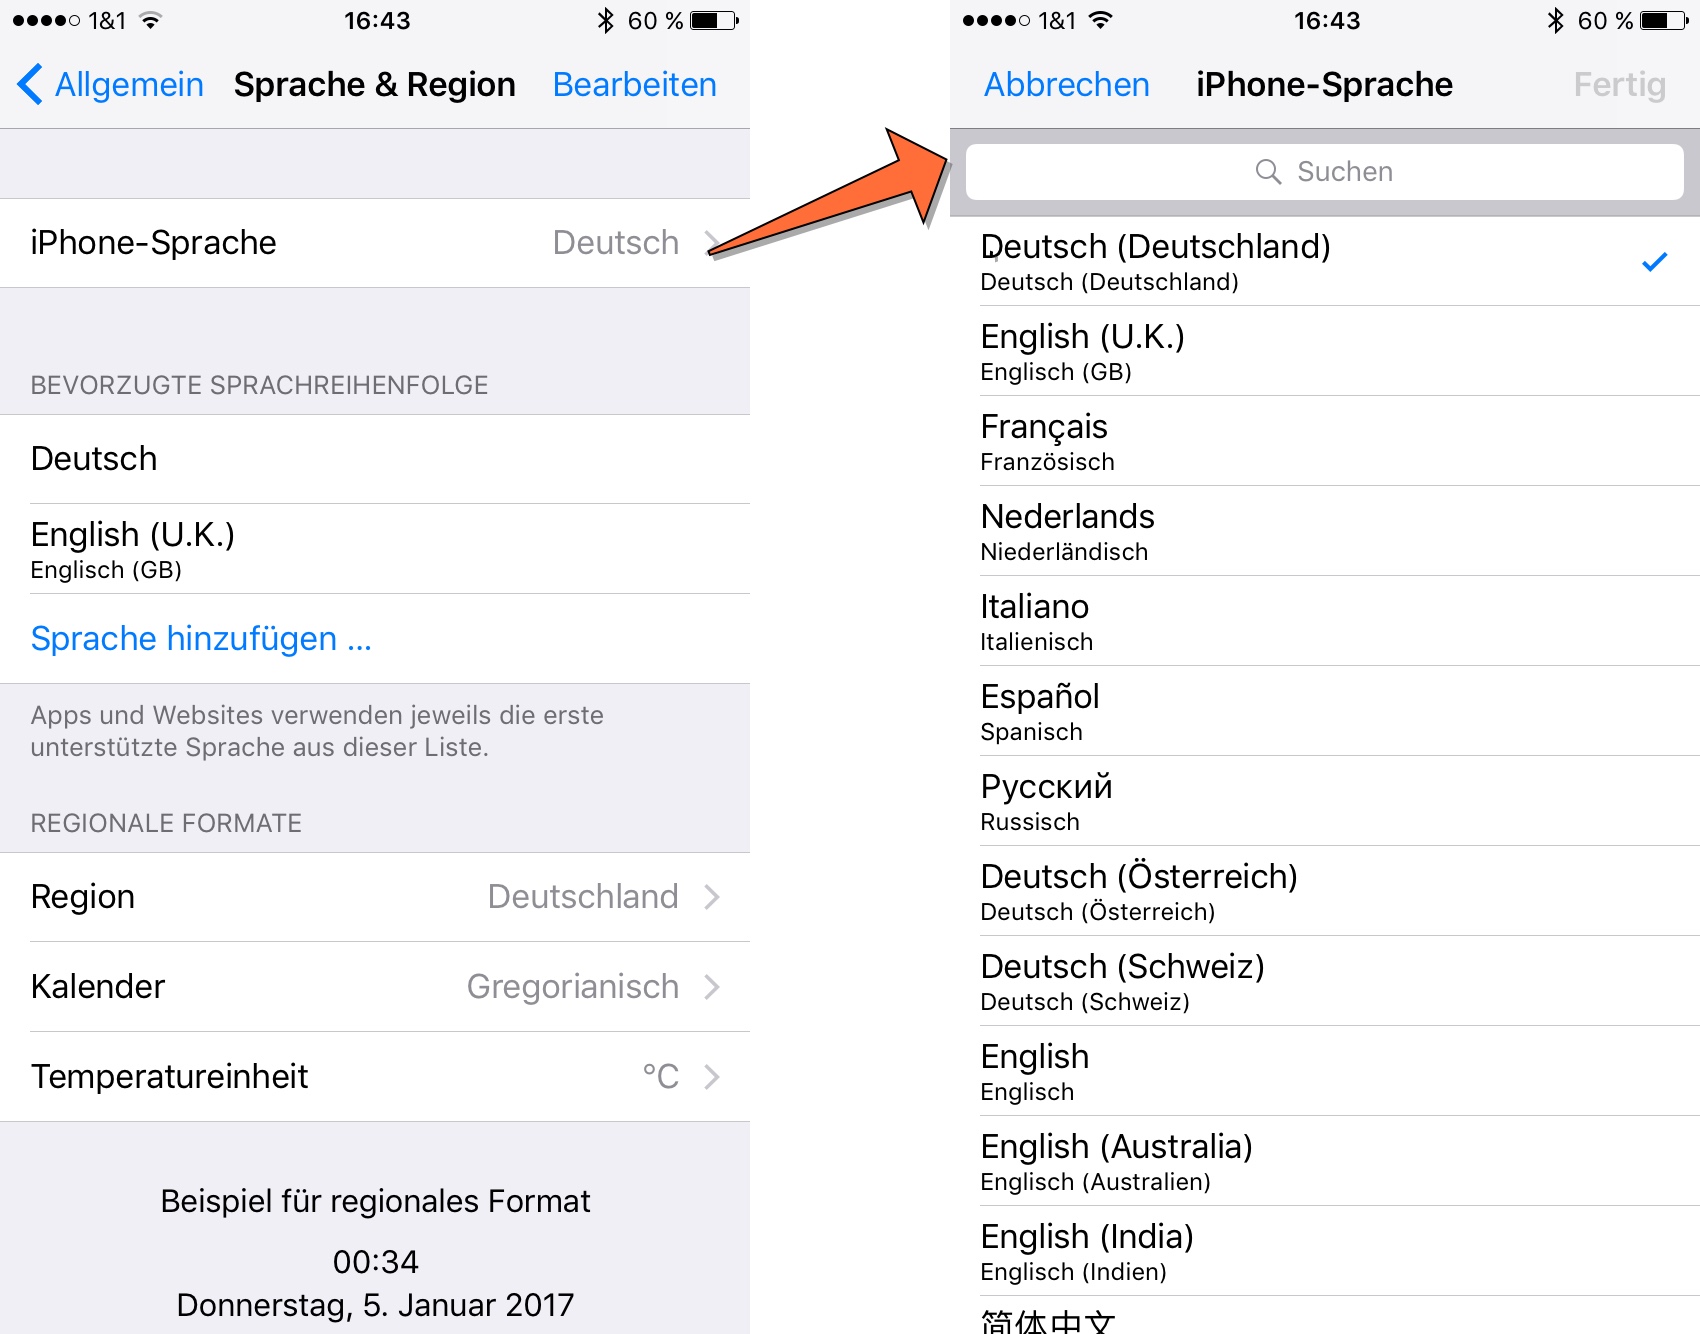 Two iPhone Screenshots. The first one shows the Language & Region Screen with "iPhone-Language" set to "Deutsch" and two preferred languages: Deutsch and English (U.K.). The second screen is the one to change the iPhone's language. It shows lots of languages and Regions with "Deutsch (Deutschland)" at the top, followed by English (U.K.) and others. There are several other entries for "Detusch", e.g. "Deutsch (Österreich)", or "Deutsch (Schweiz)"